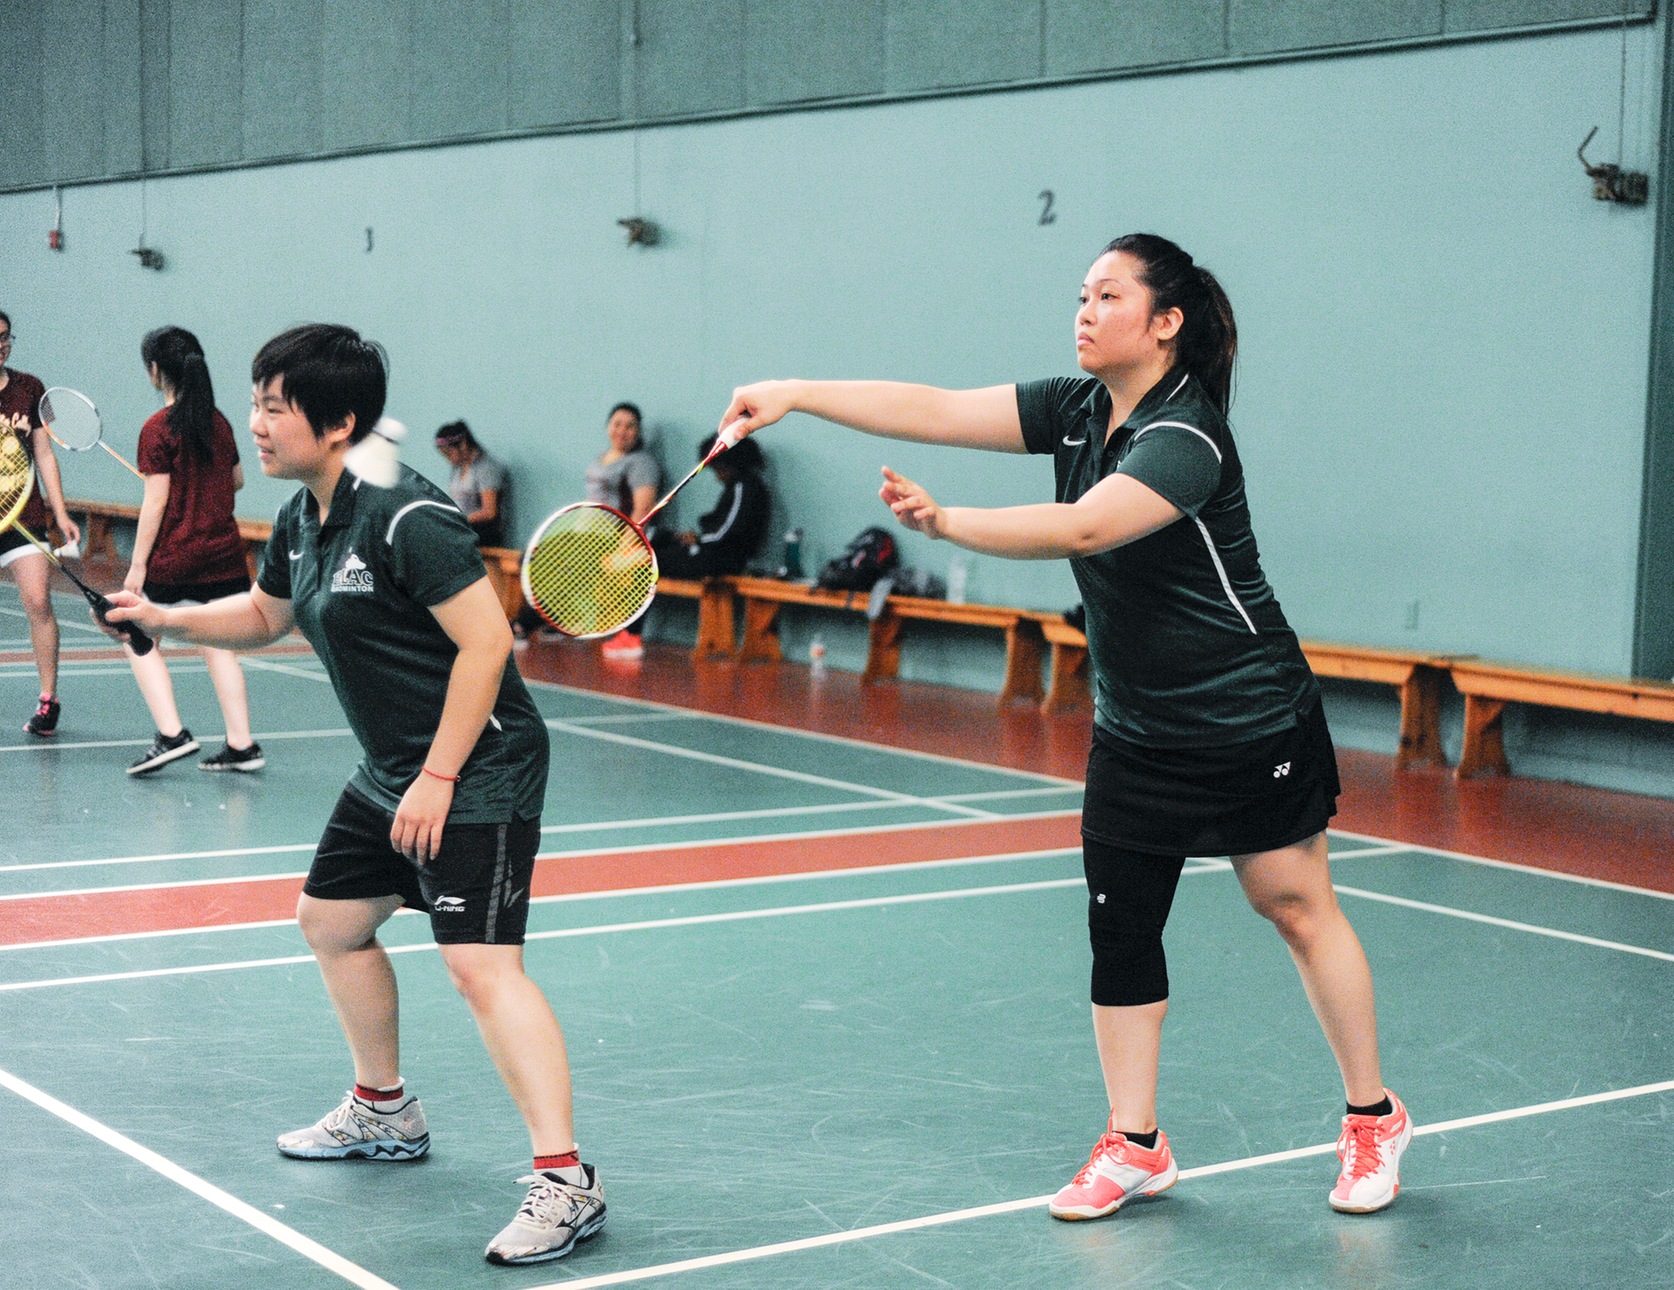 East Los Angeles College's top doubles team, the defending state champions and No. 8-seed at the State Badminton Championships, take it to the distance in a 21-14, 15-21, 21-19 loss to No. 2-seed Fresno City College at state. (Photo by Tadzio Garcia)